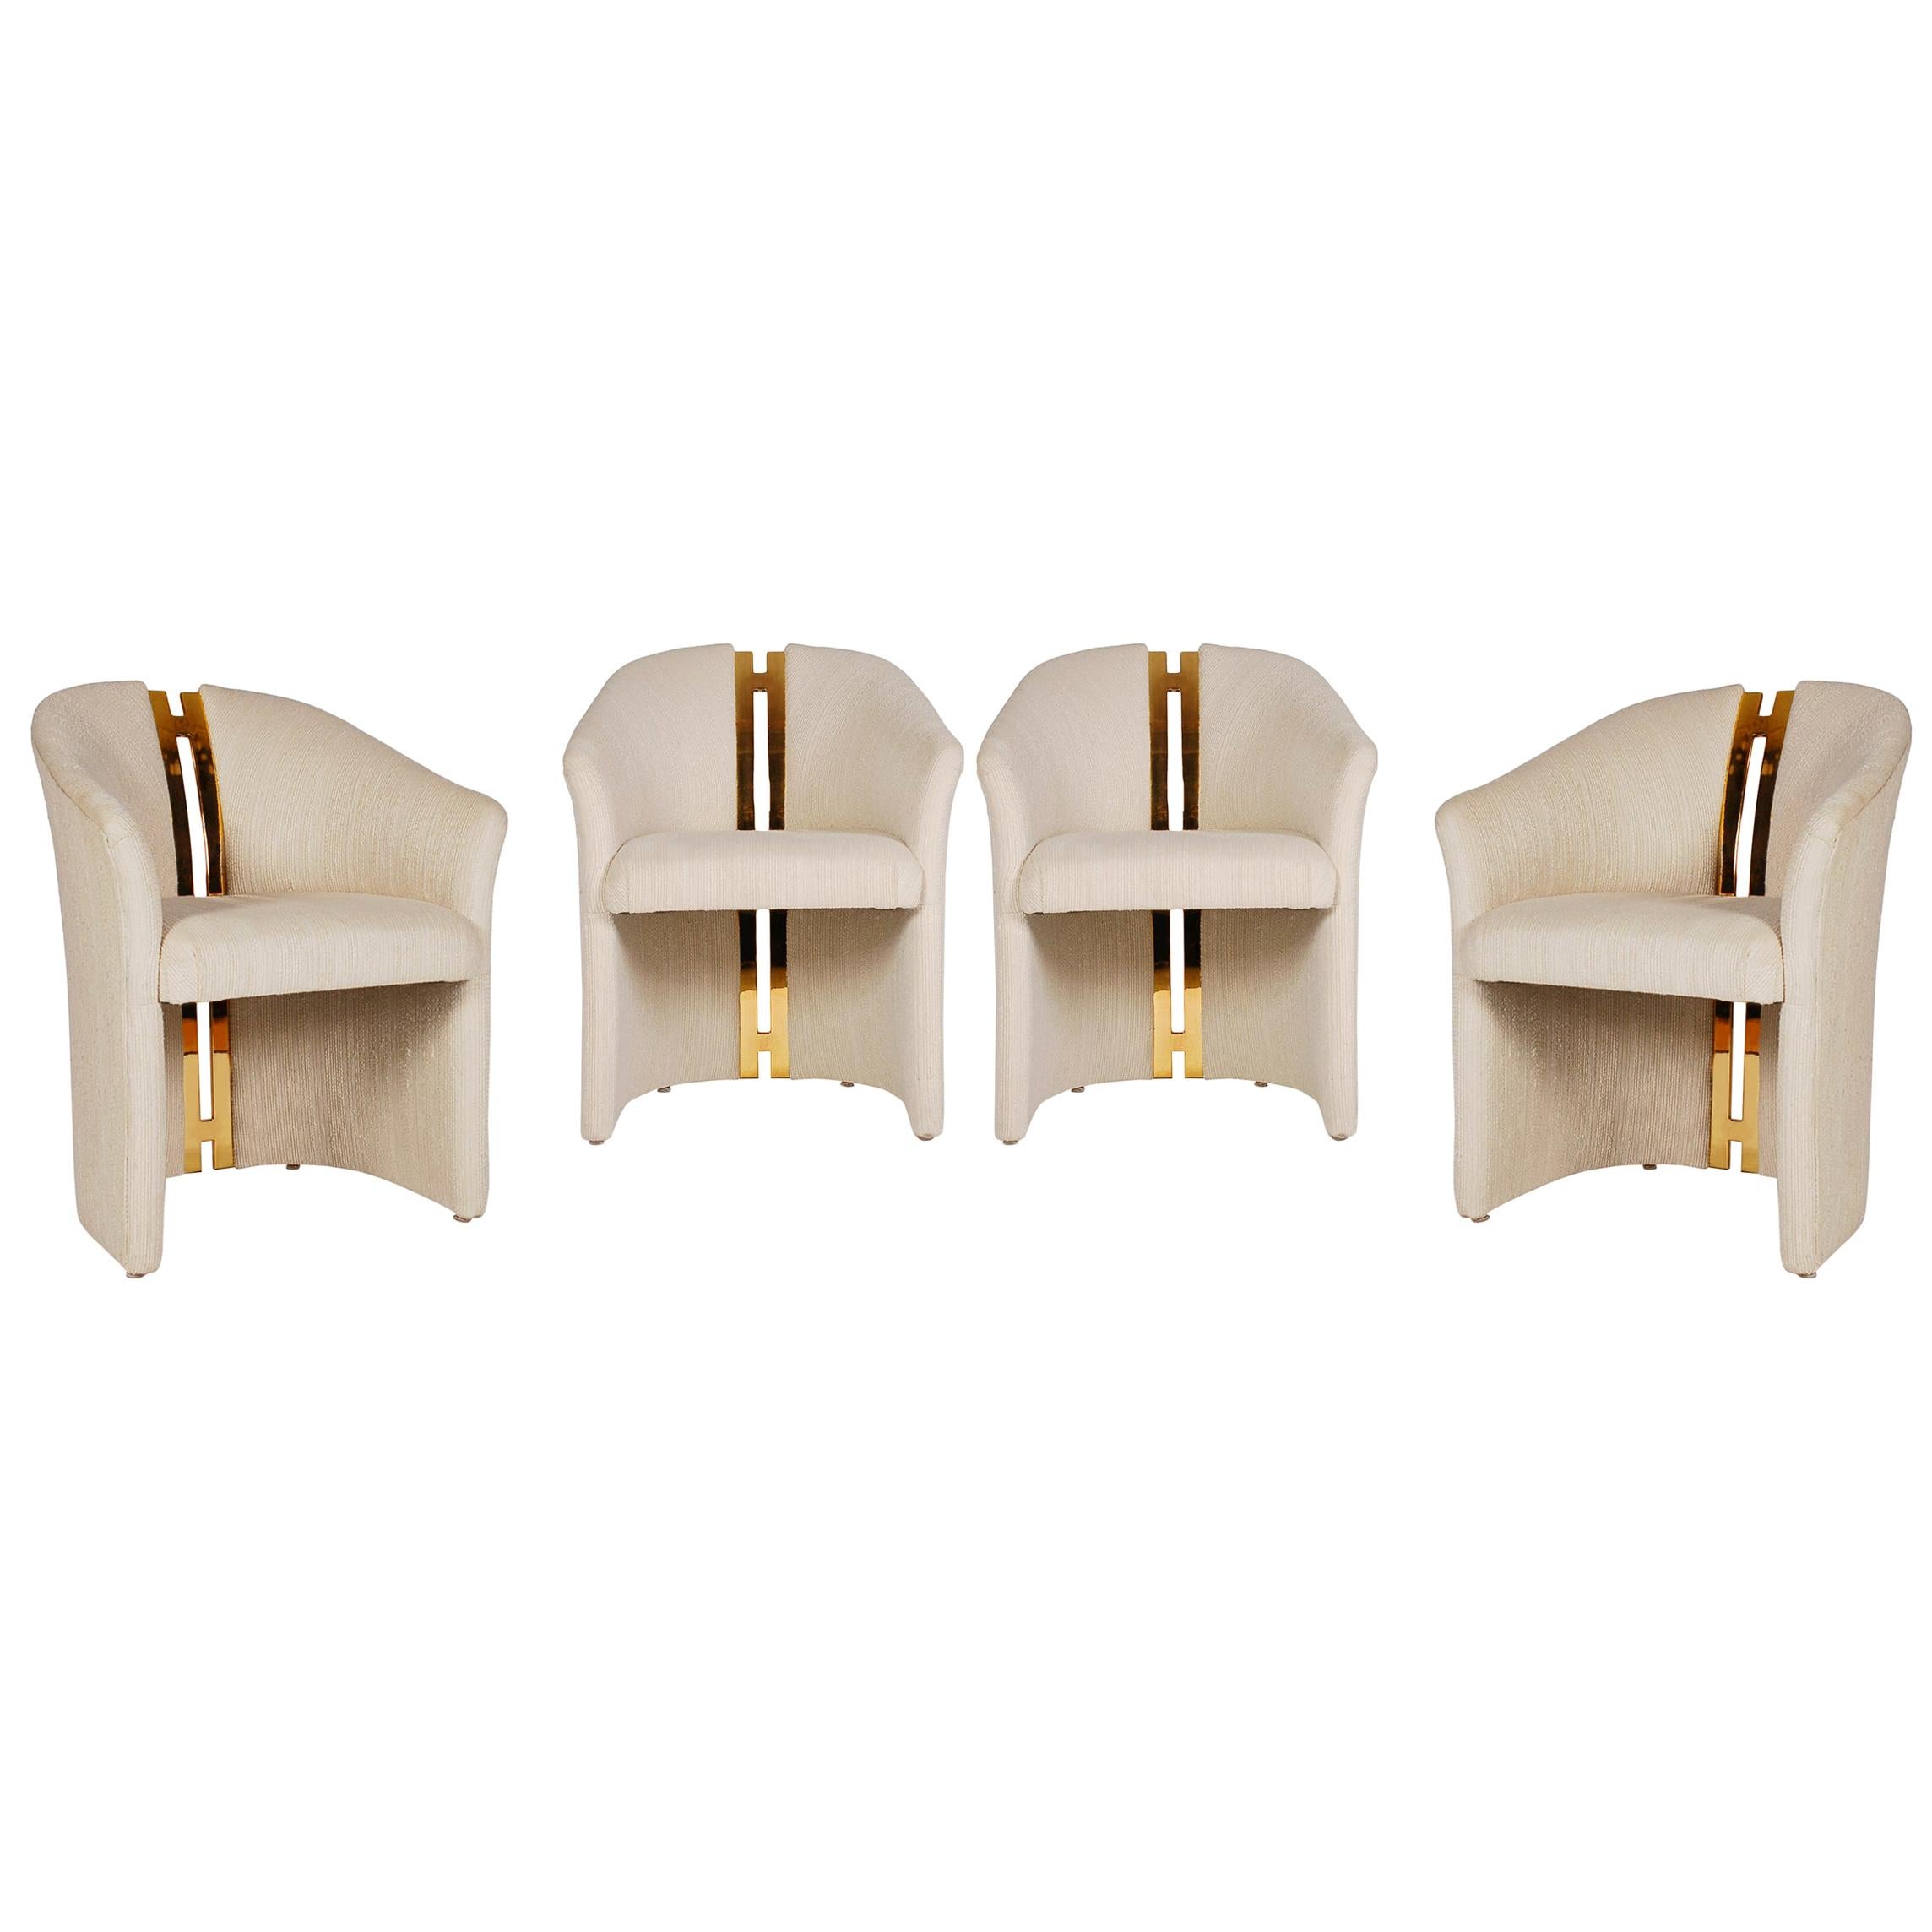 Four Mid-Century Modern Barrel Back Armchairs with Brass after Pierre Cardin